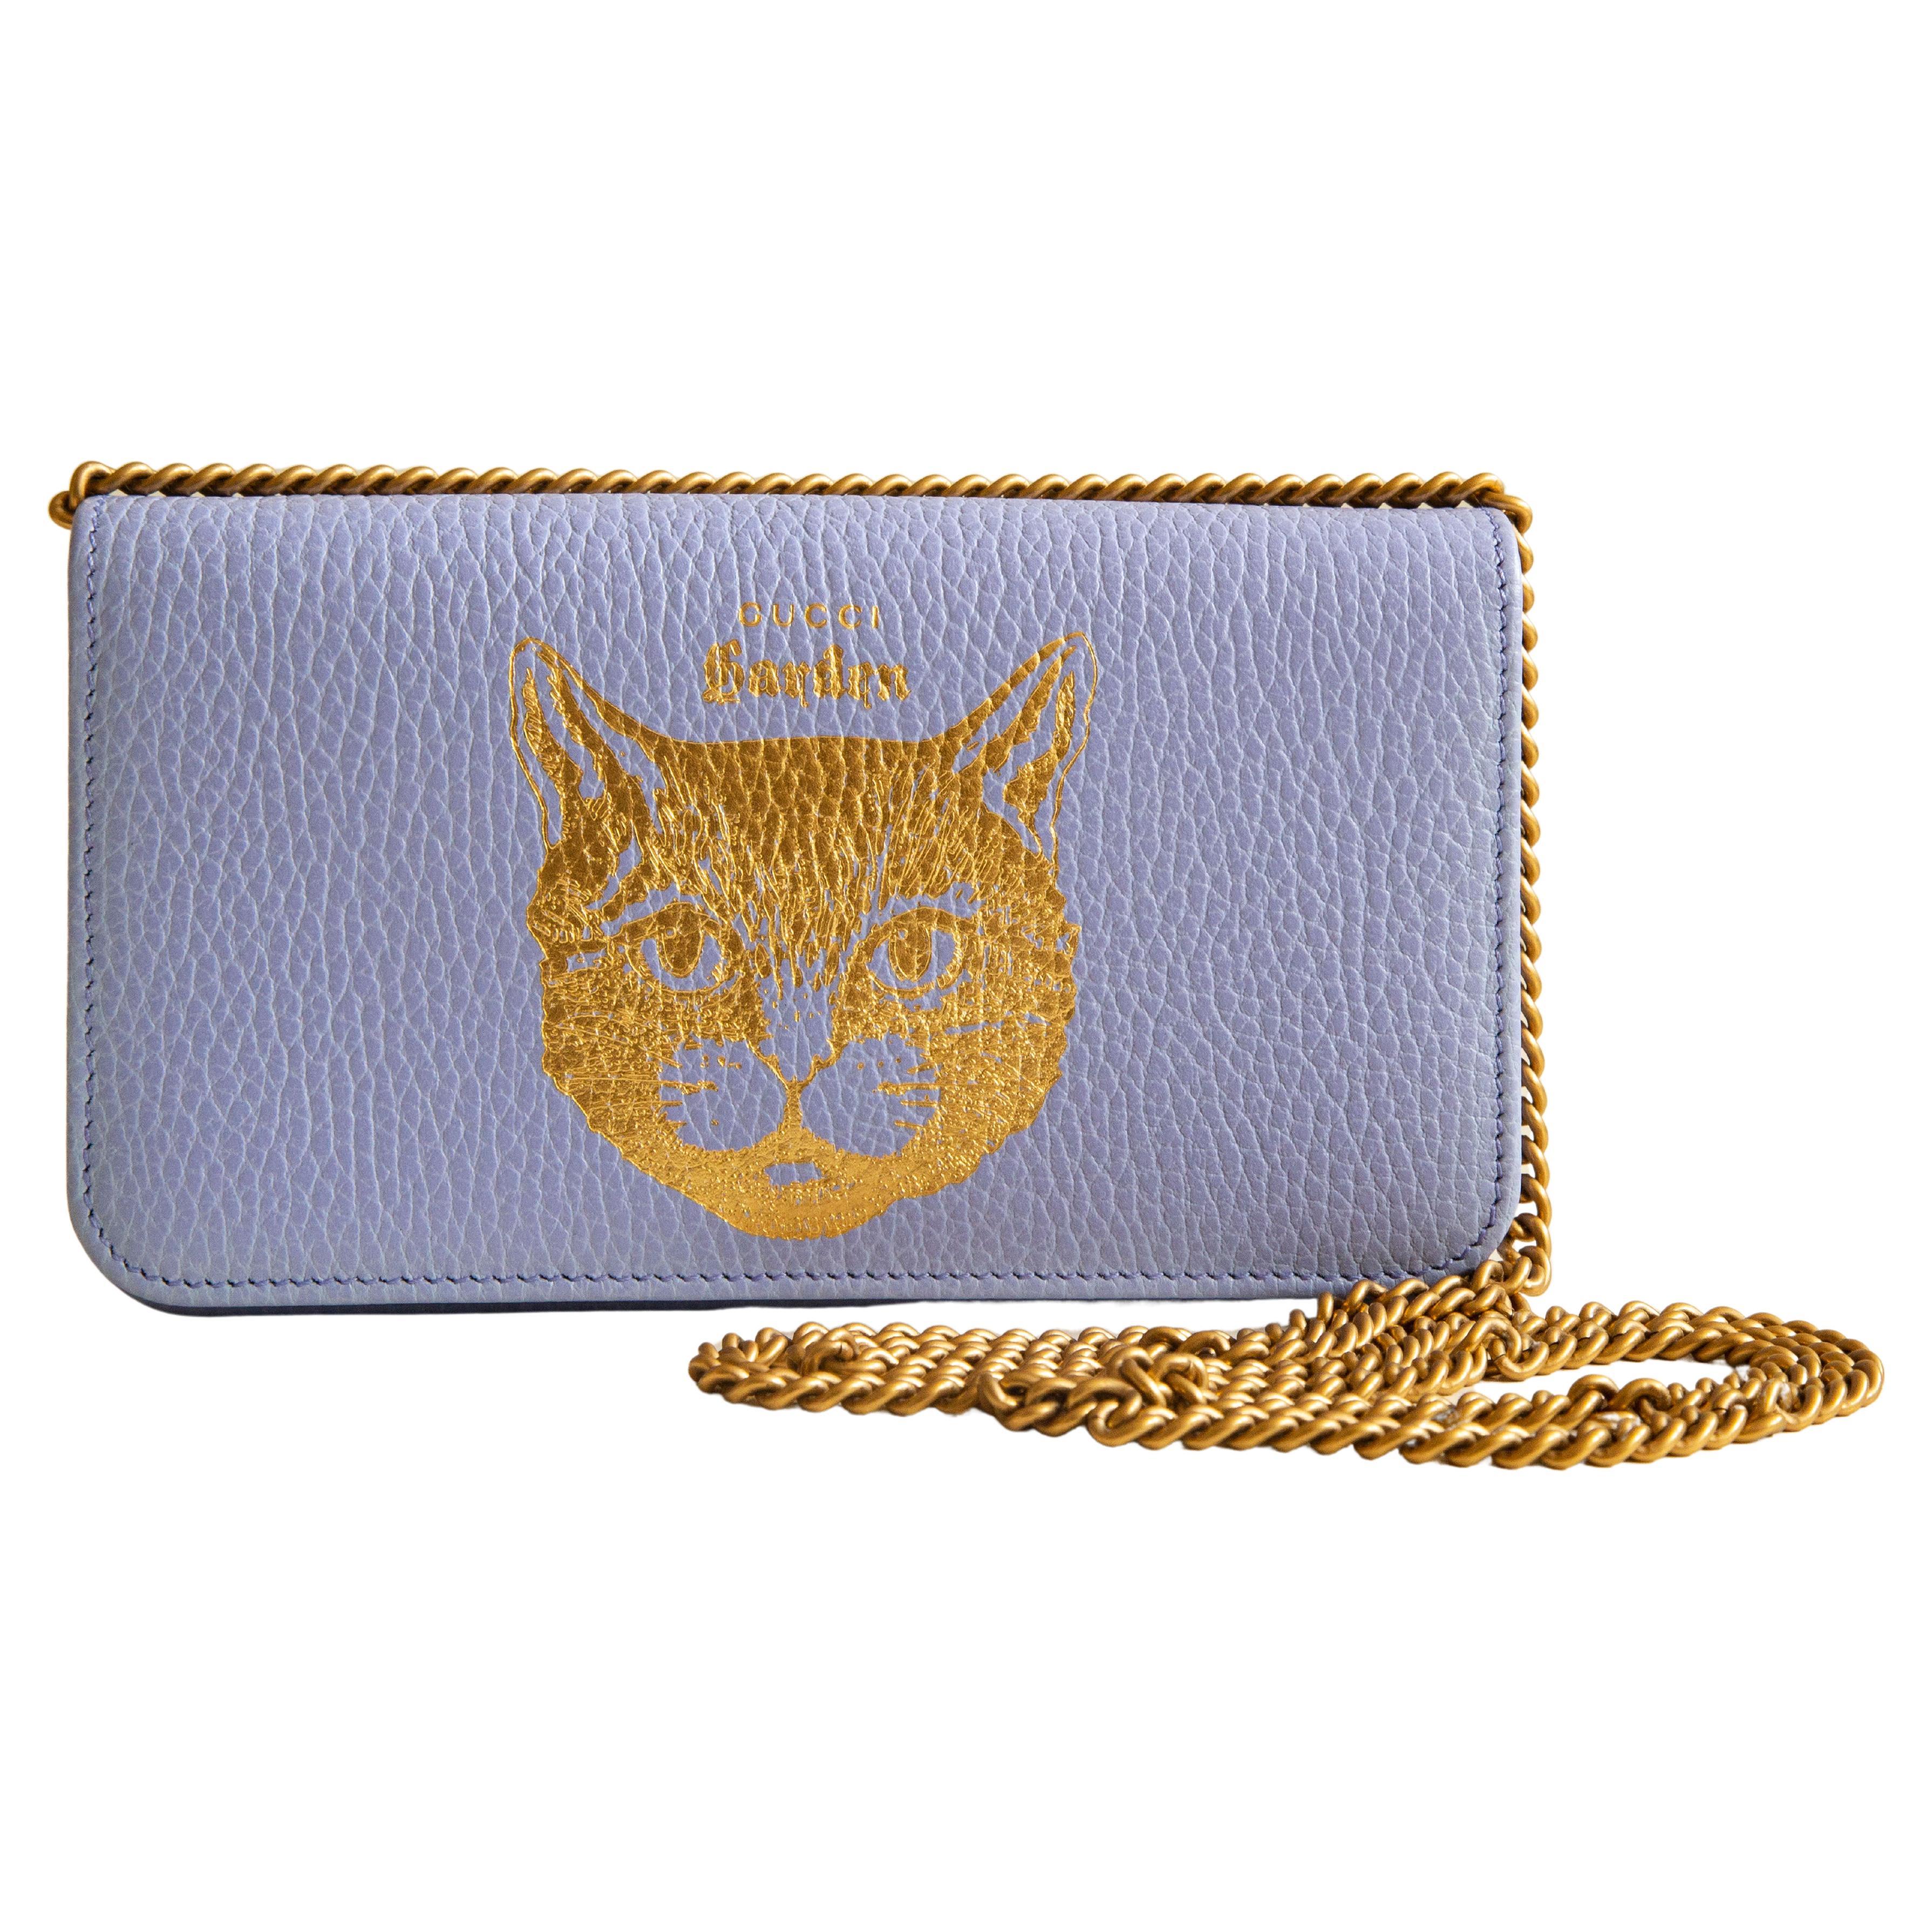 Gucci Garden Limited Edition Cat Chain Pouch Crossbody Bag in Light Lila For Sale